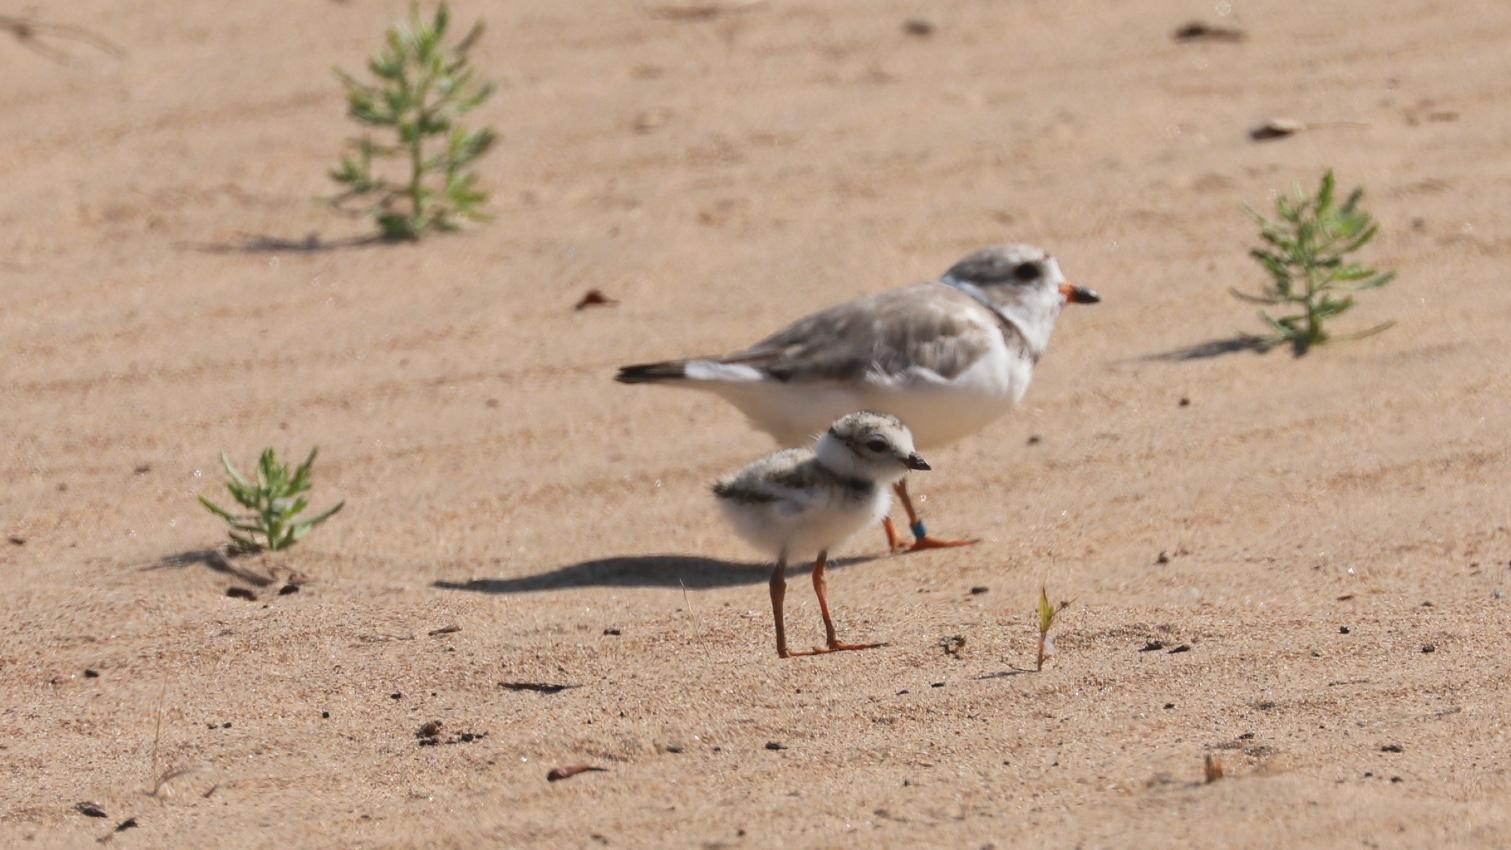 A plover parent and chick at Montrose Beach in 2019, courtesy of the Shedd Aquarium. (Credit: Susan Szeszol)